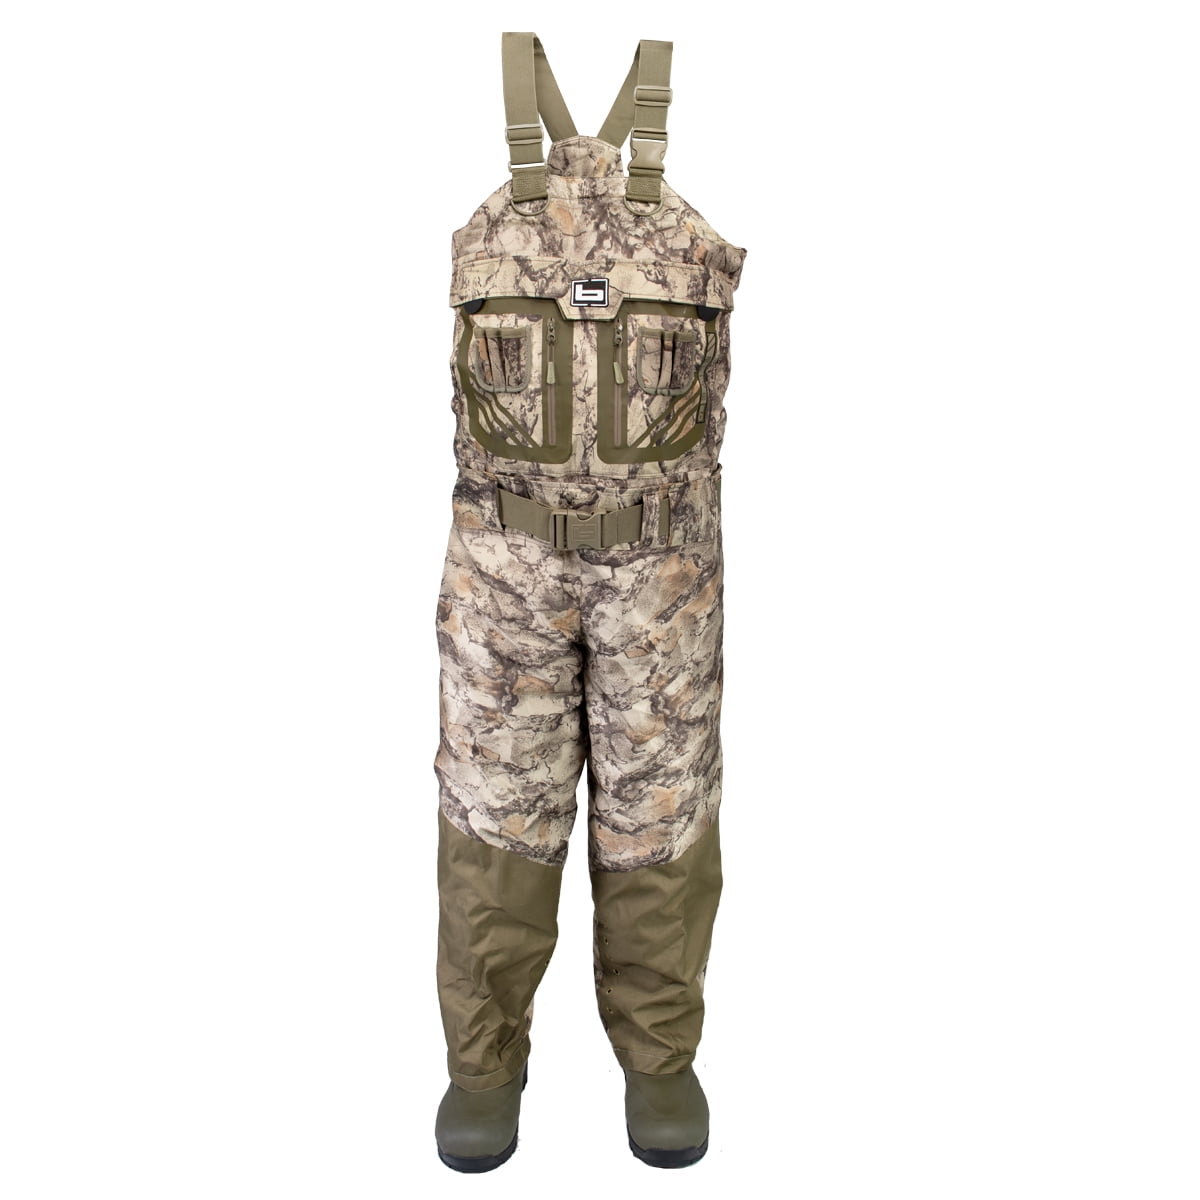 Banded RedZone Elite 2.0 Insulated Wader King Natural Gear 14 - Walmart.com